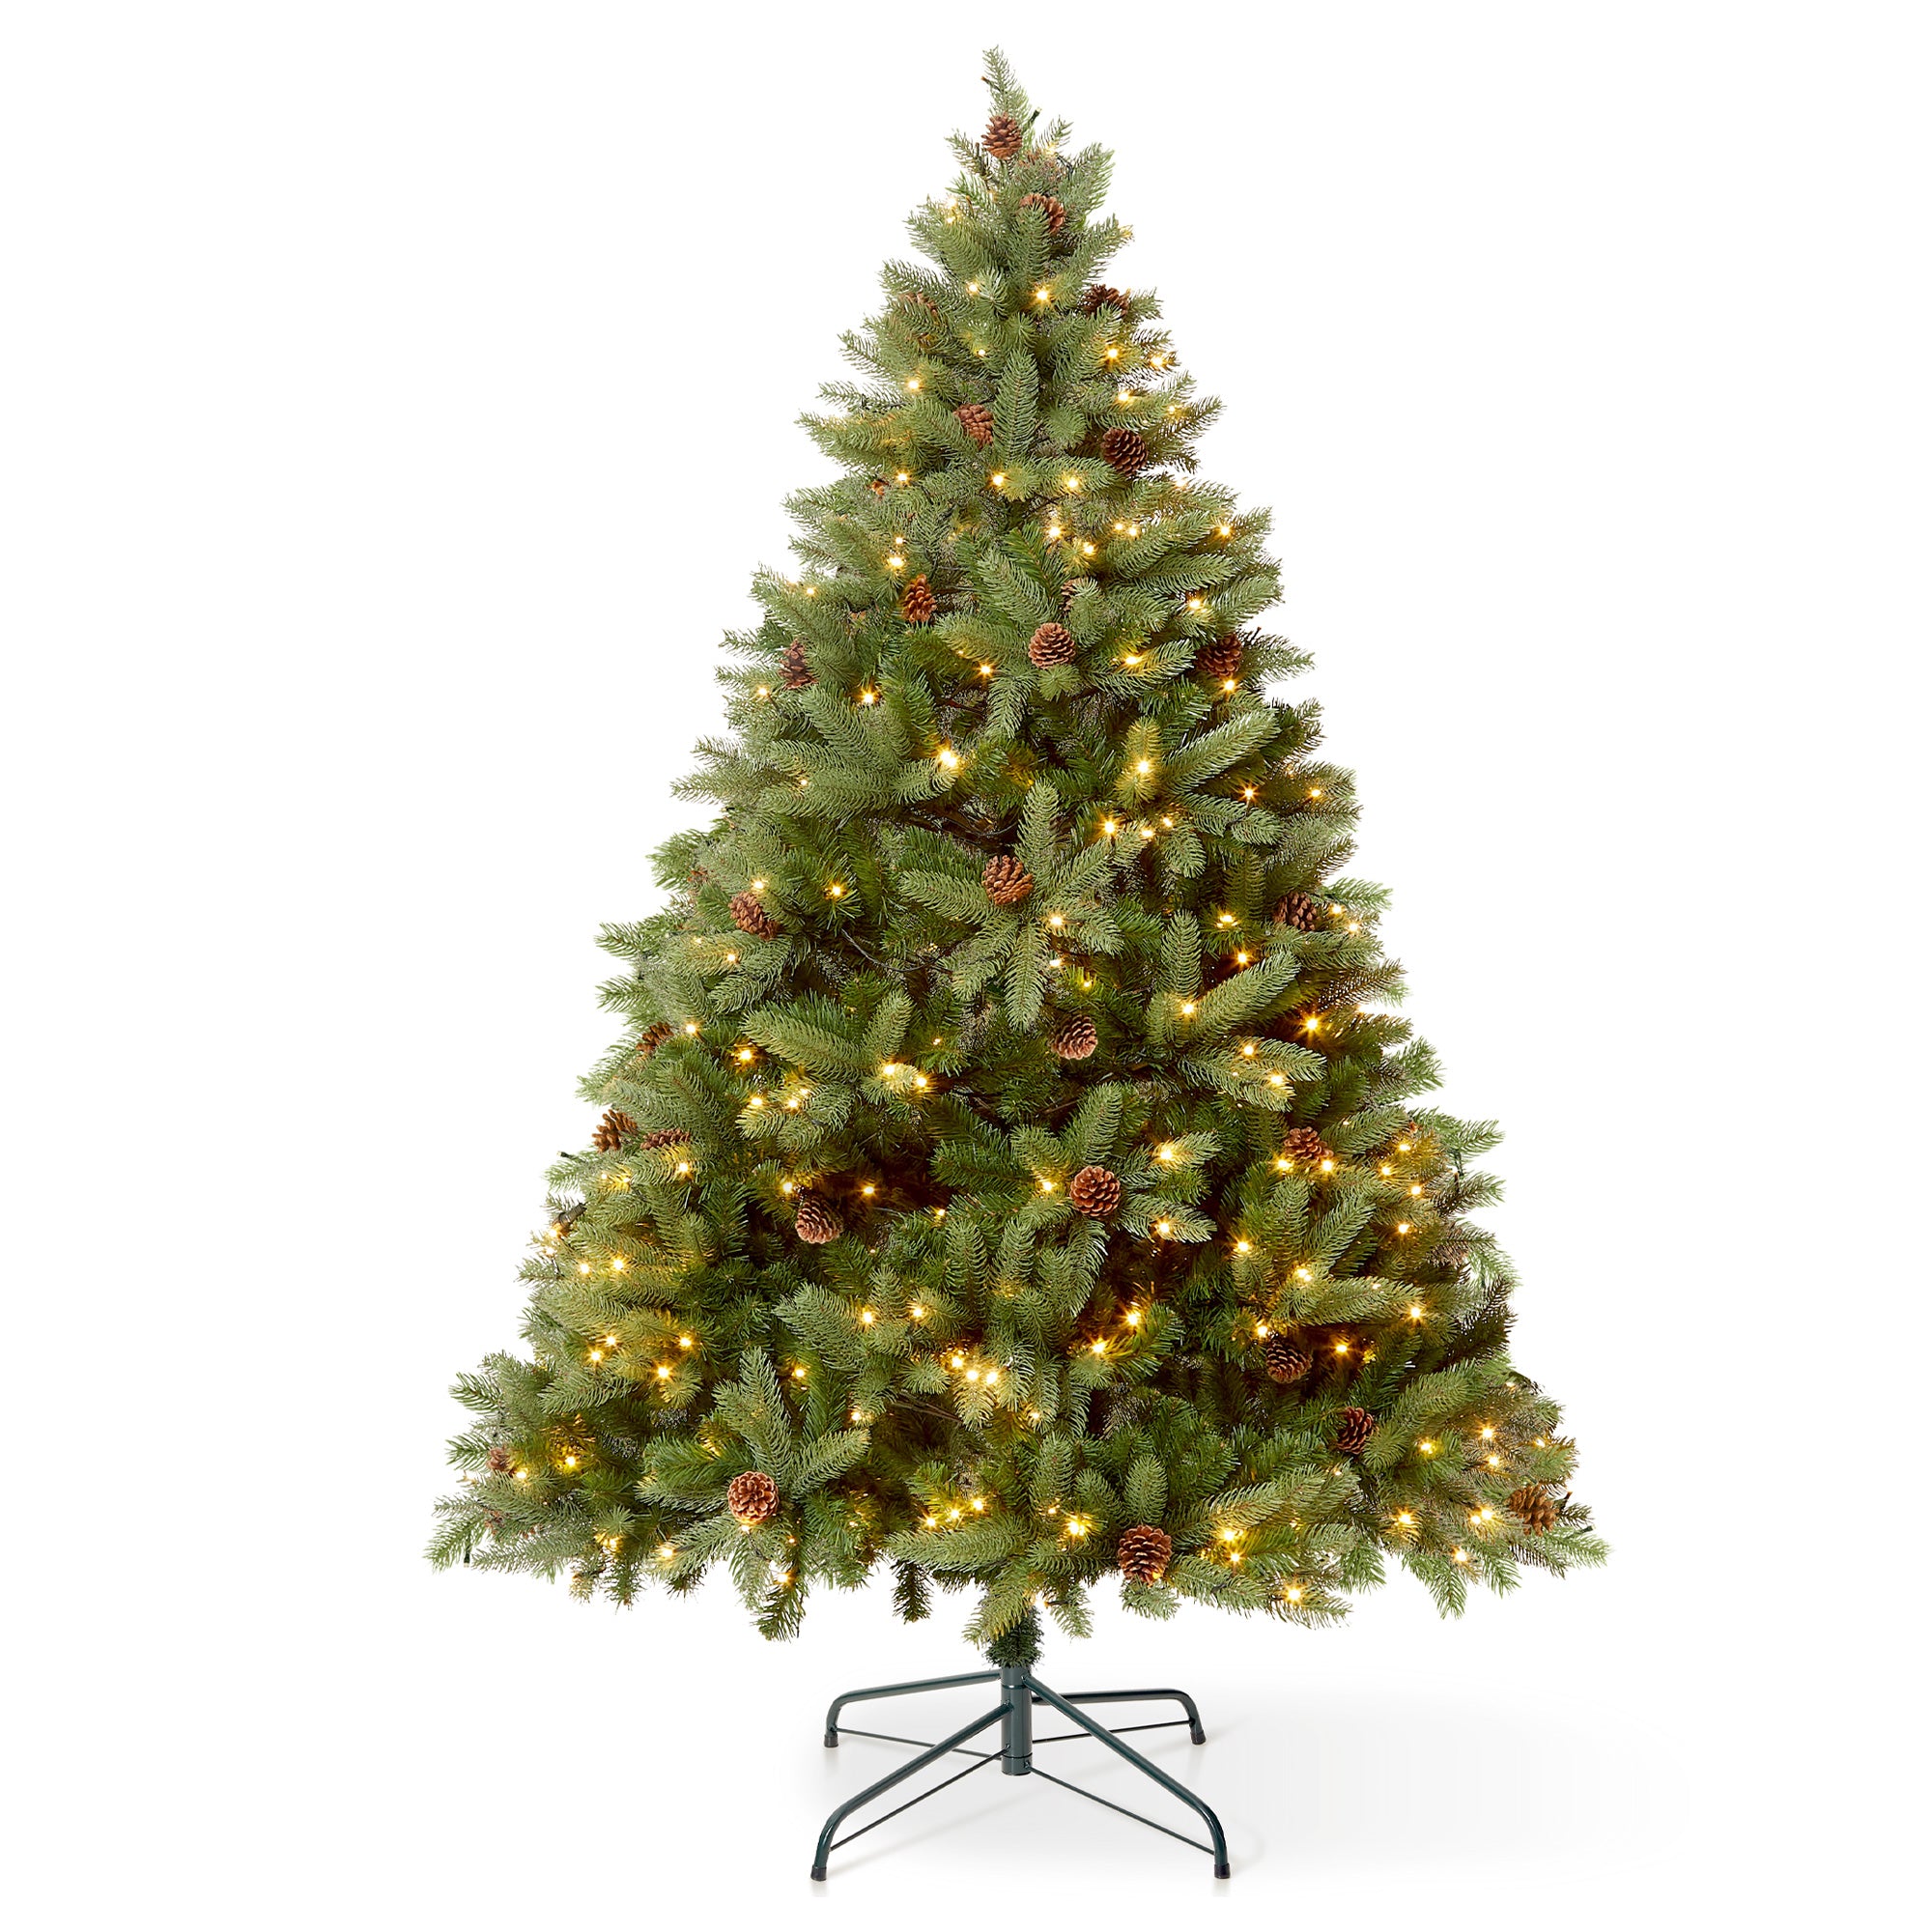 VeryMerry 6FT 'Ascot' Pre-Lit Christmas Tree with 300 Built-In Warm White LED Lights with Auto-Off Timer, 8 Lighting Modes and Real Decorative Pinecones